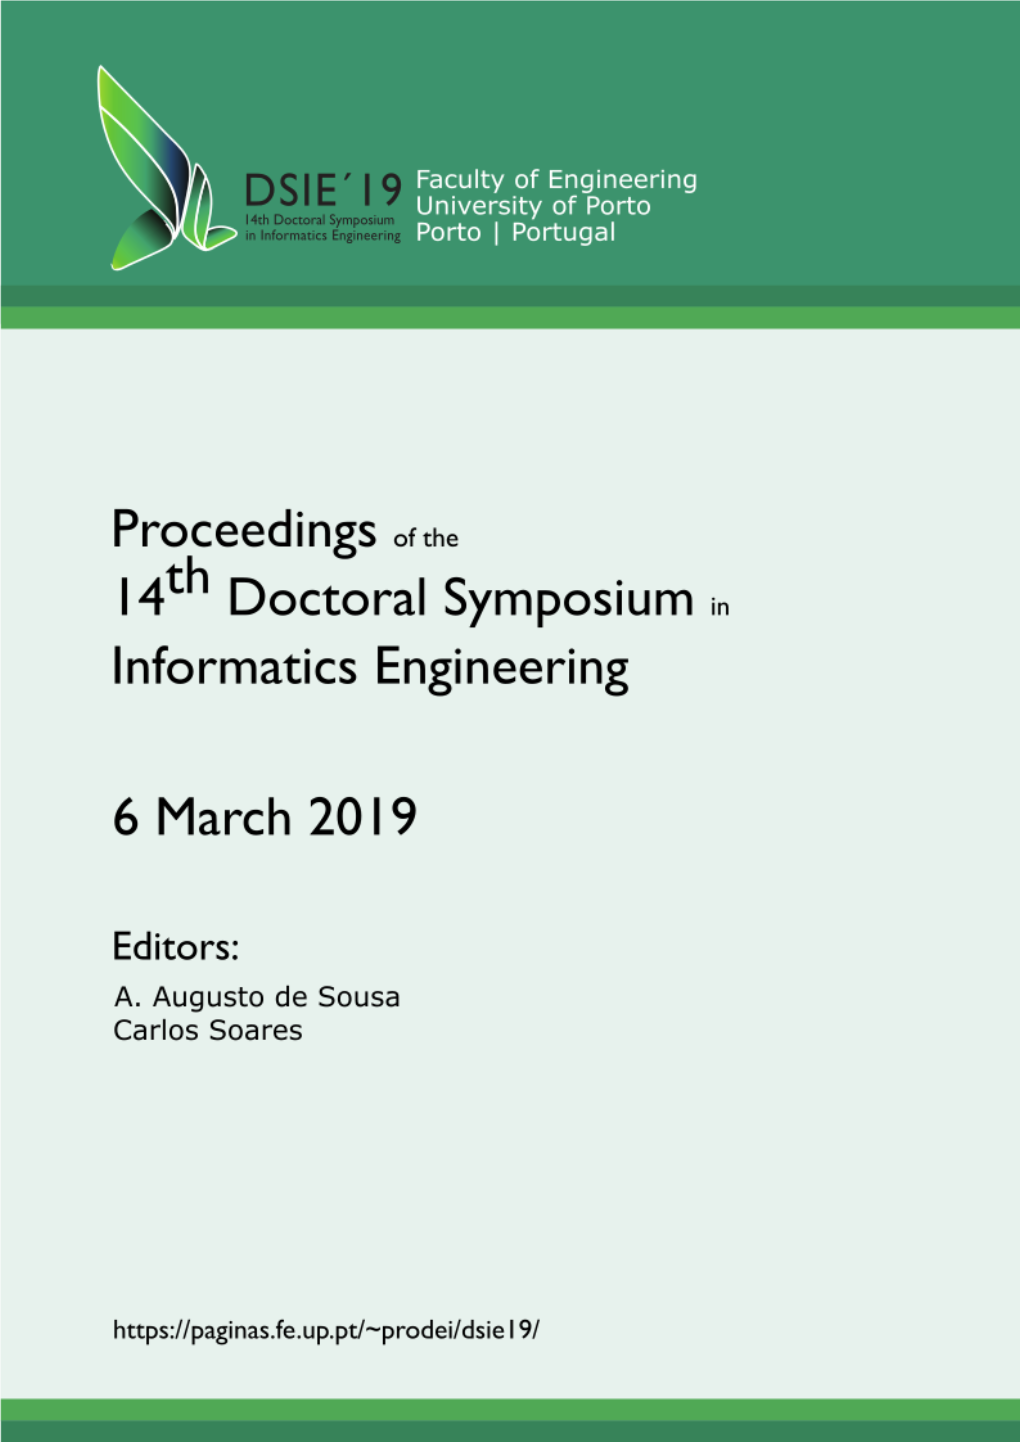 Proceedings Include Papers Addressing Different Topics According to the Current Students’ Interest in Informatics